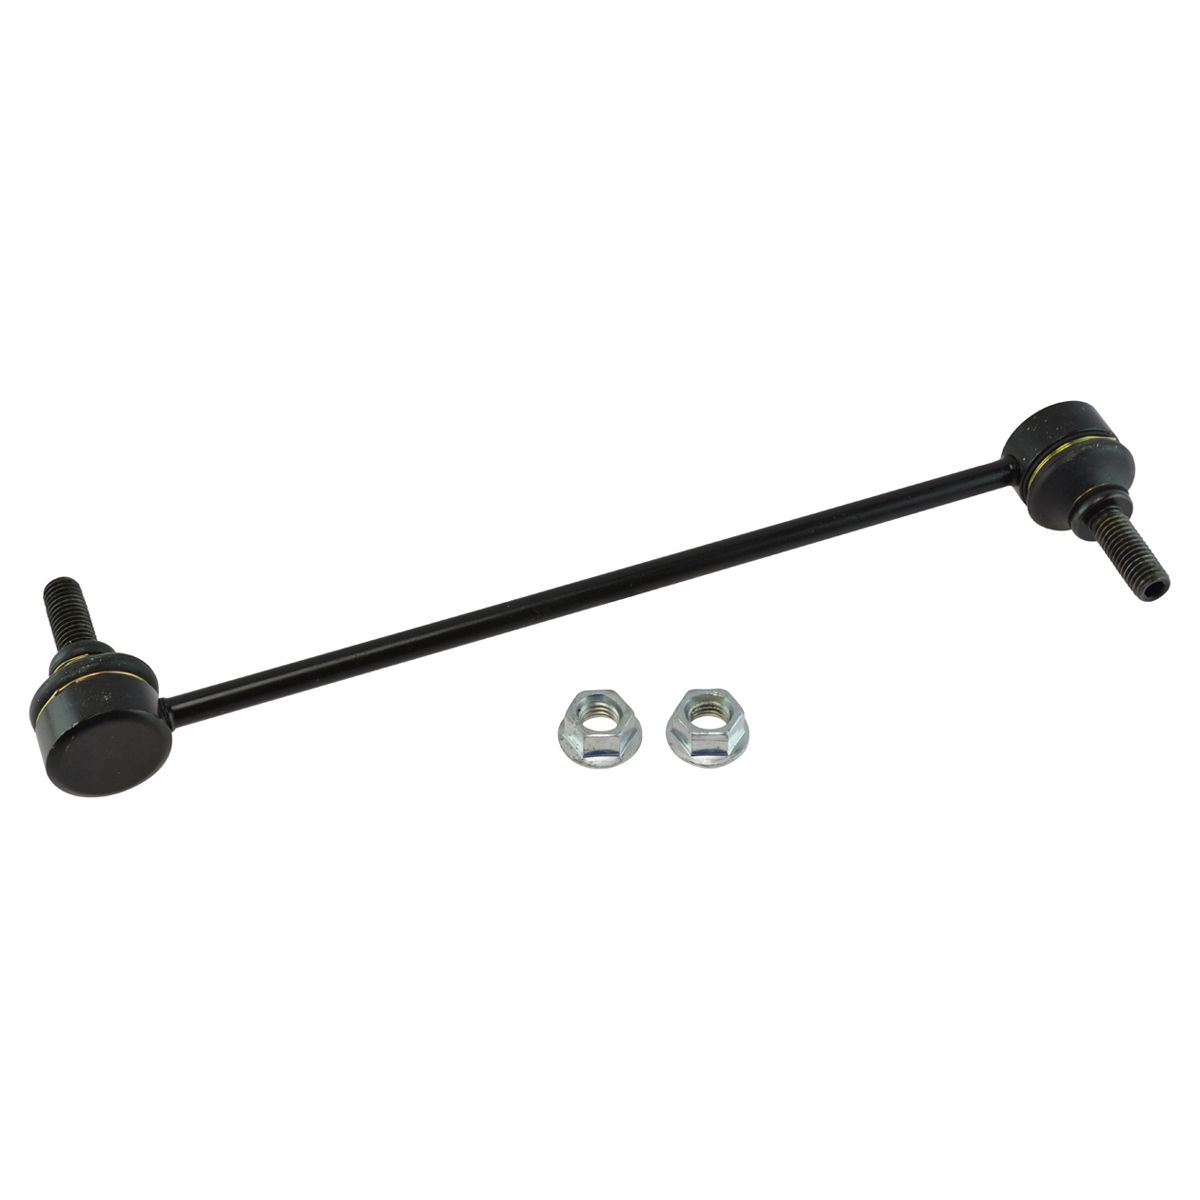 New 2 Front Stabilizer Sway Bar Links For Buick Chevrolet Pontiac Saturn